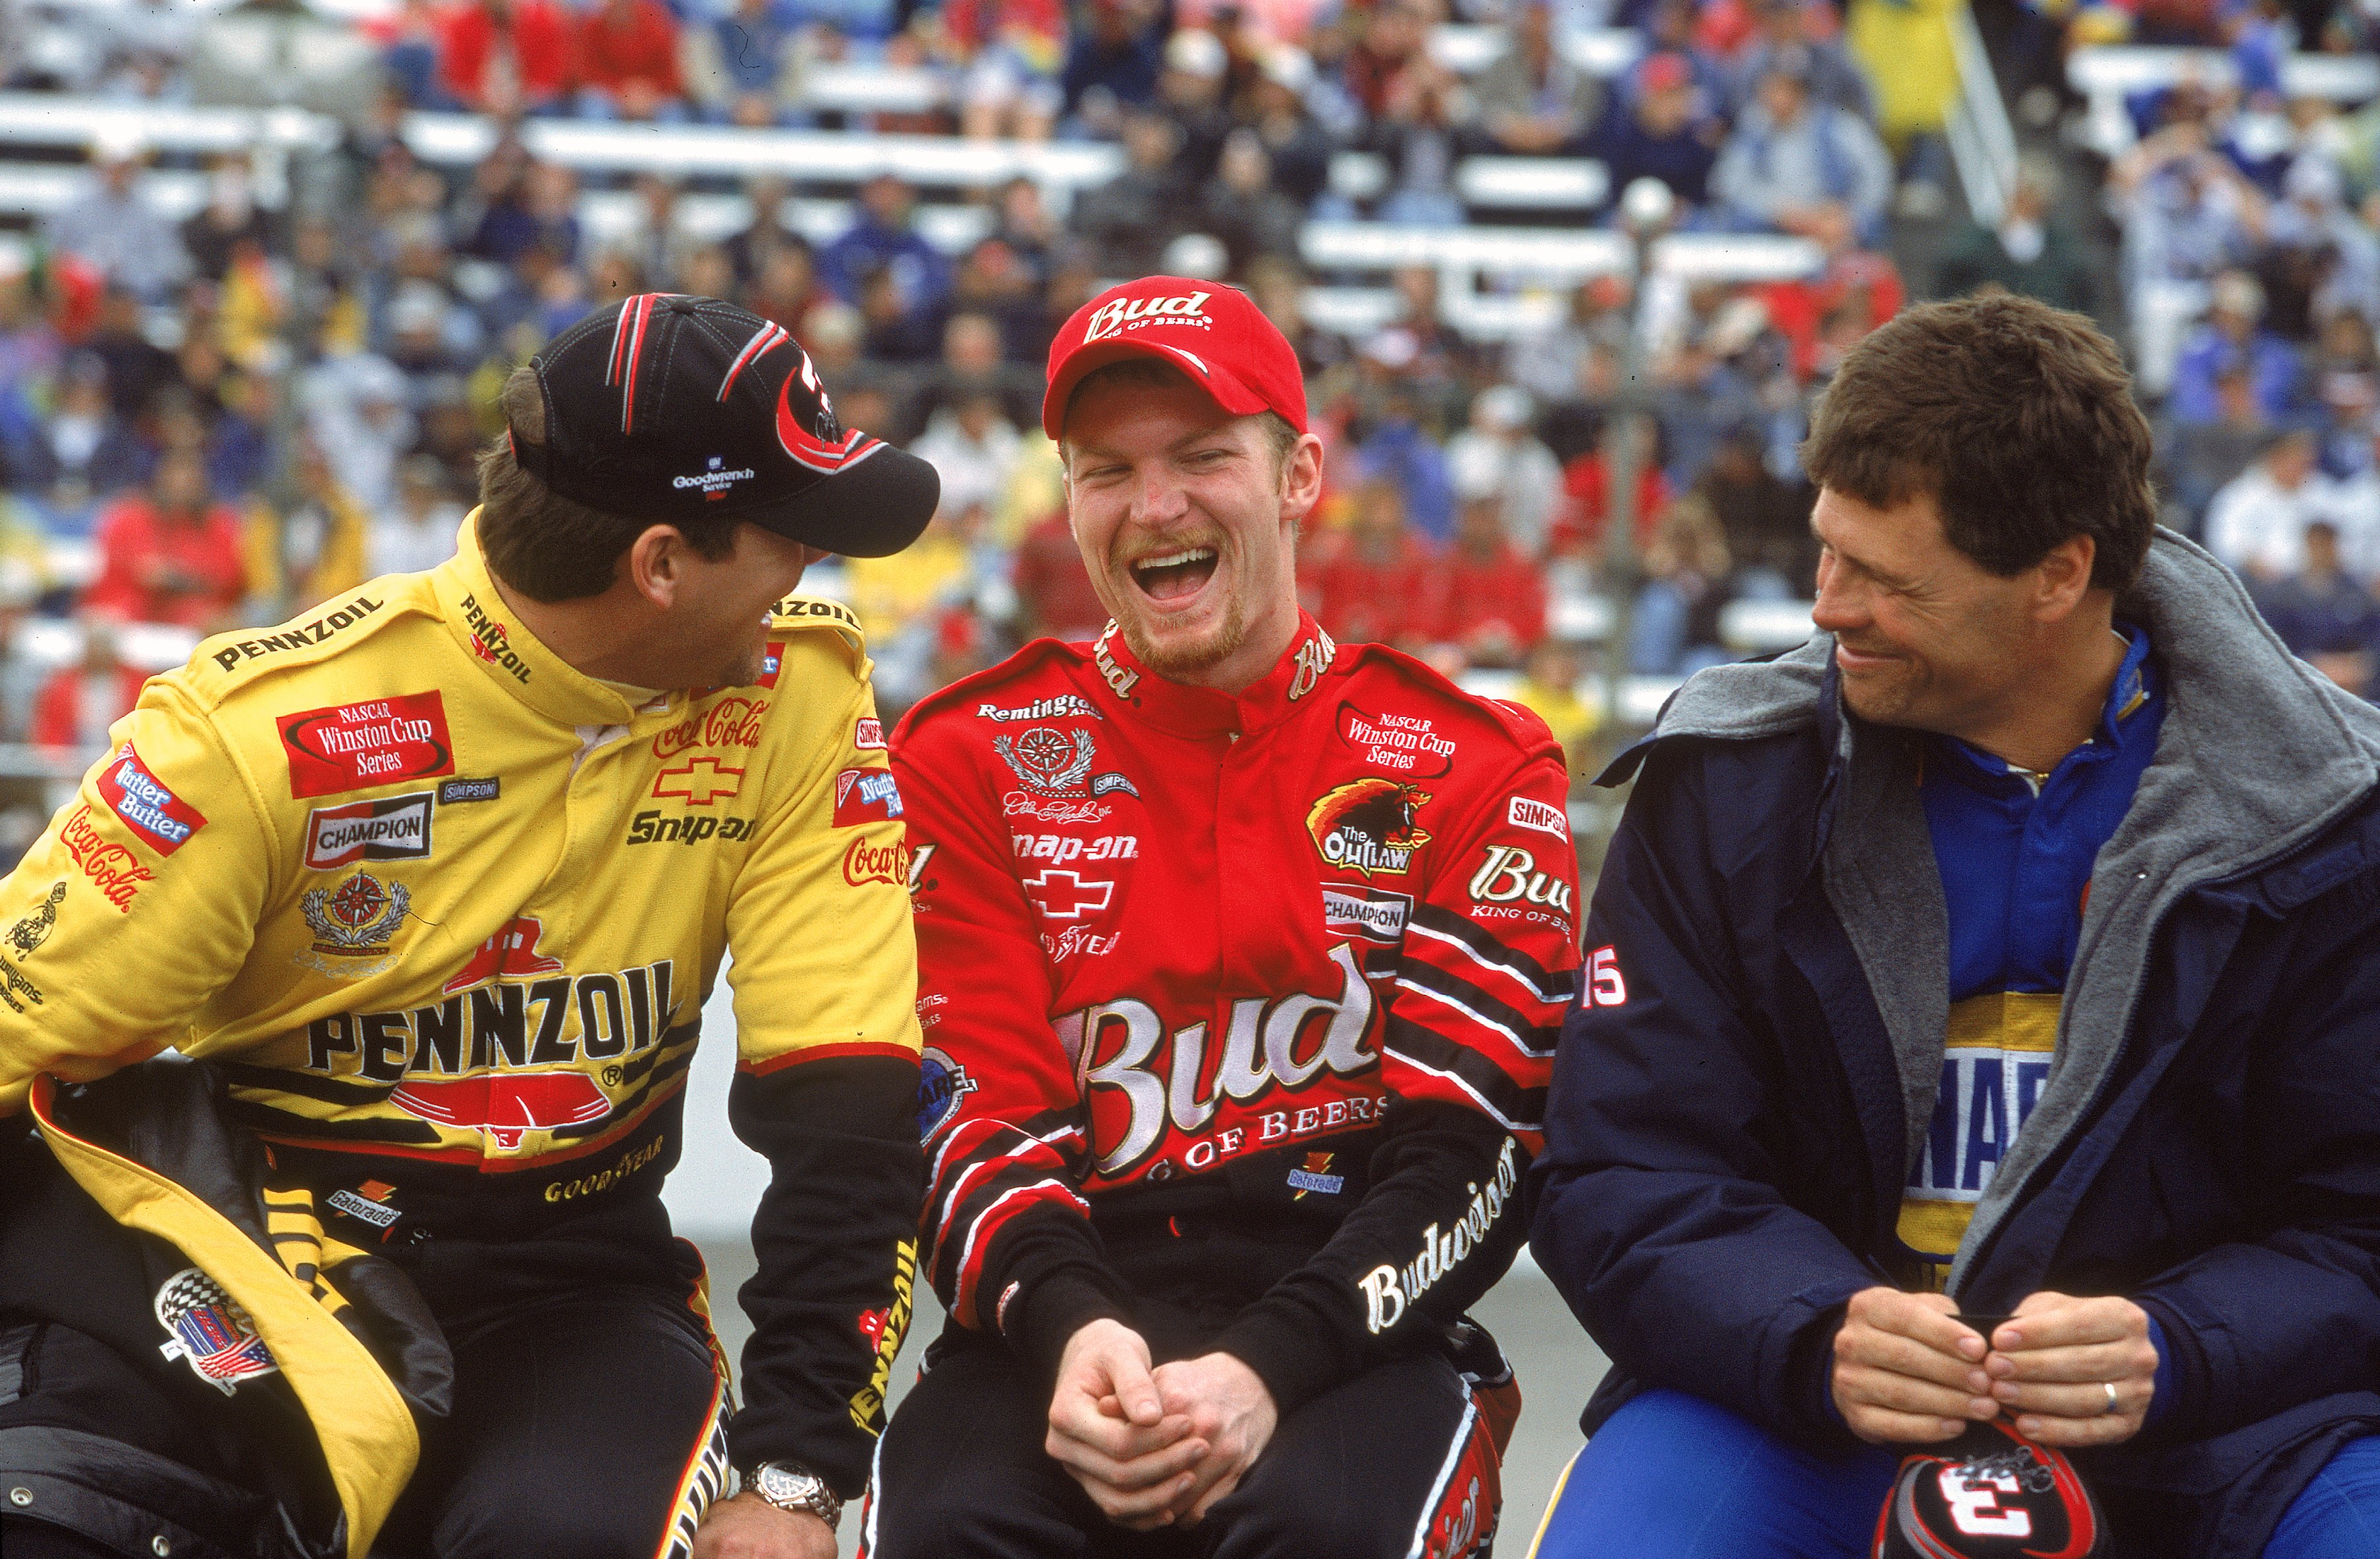 23 Feb 2001: Steve Park,Dale Earnhardt Jr and Michael Waltrip sit and laugh during the Dura Lube 400, part of the Winston Cup Series at the North Carolina Speedway in Rockingham, North Carolina.Mandatory Credit: Donald Miralle /Allsport